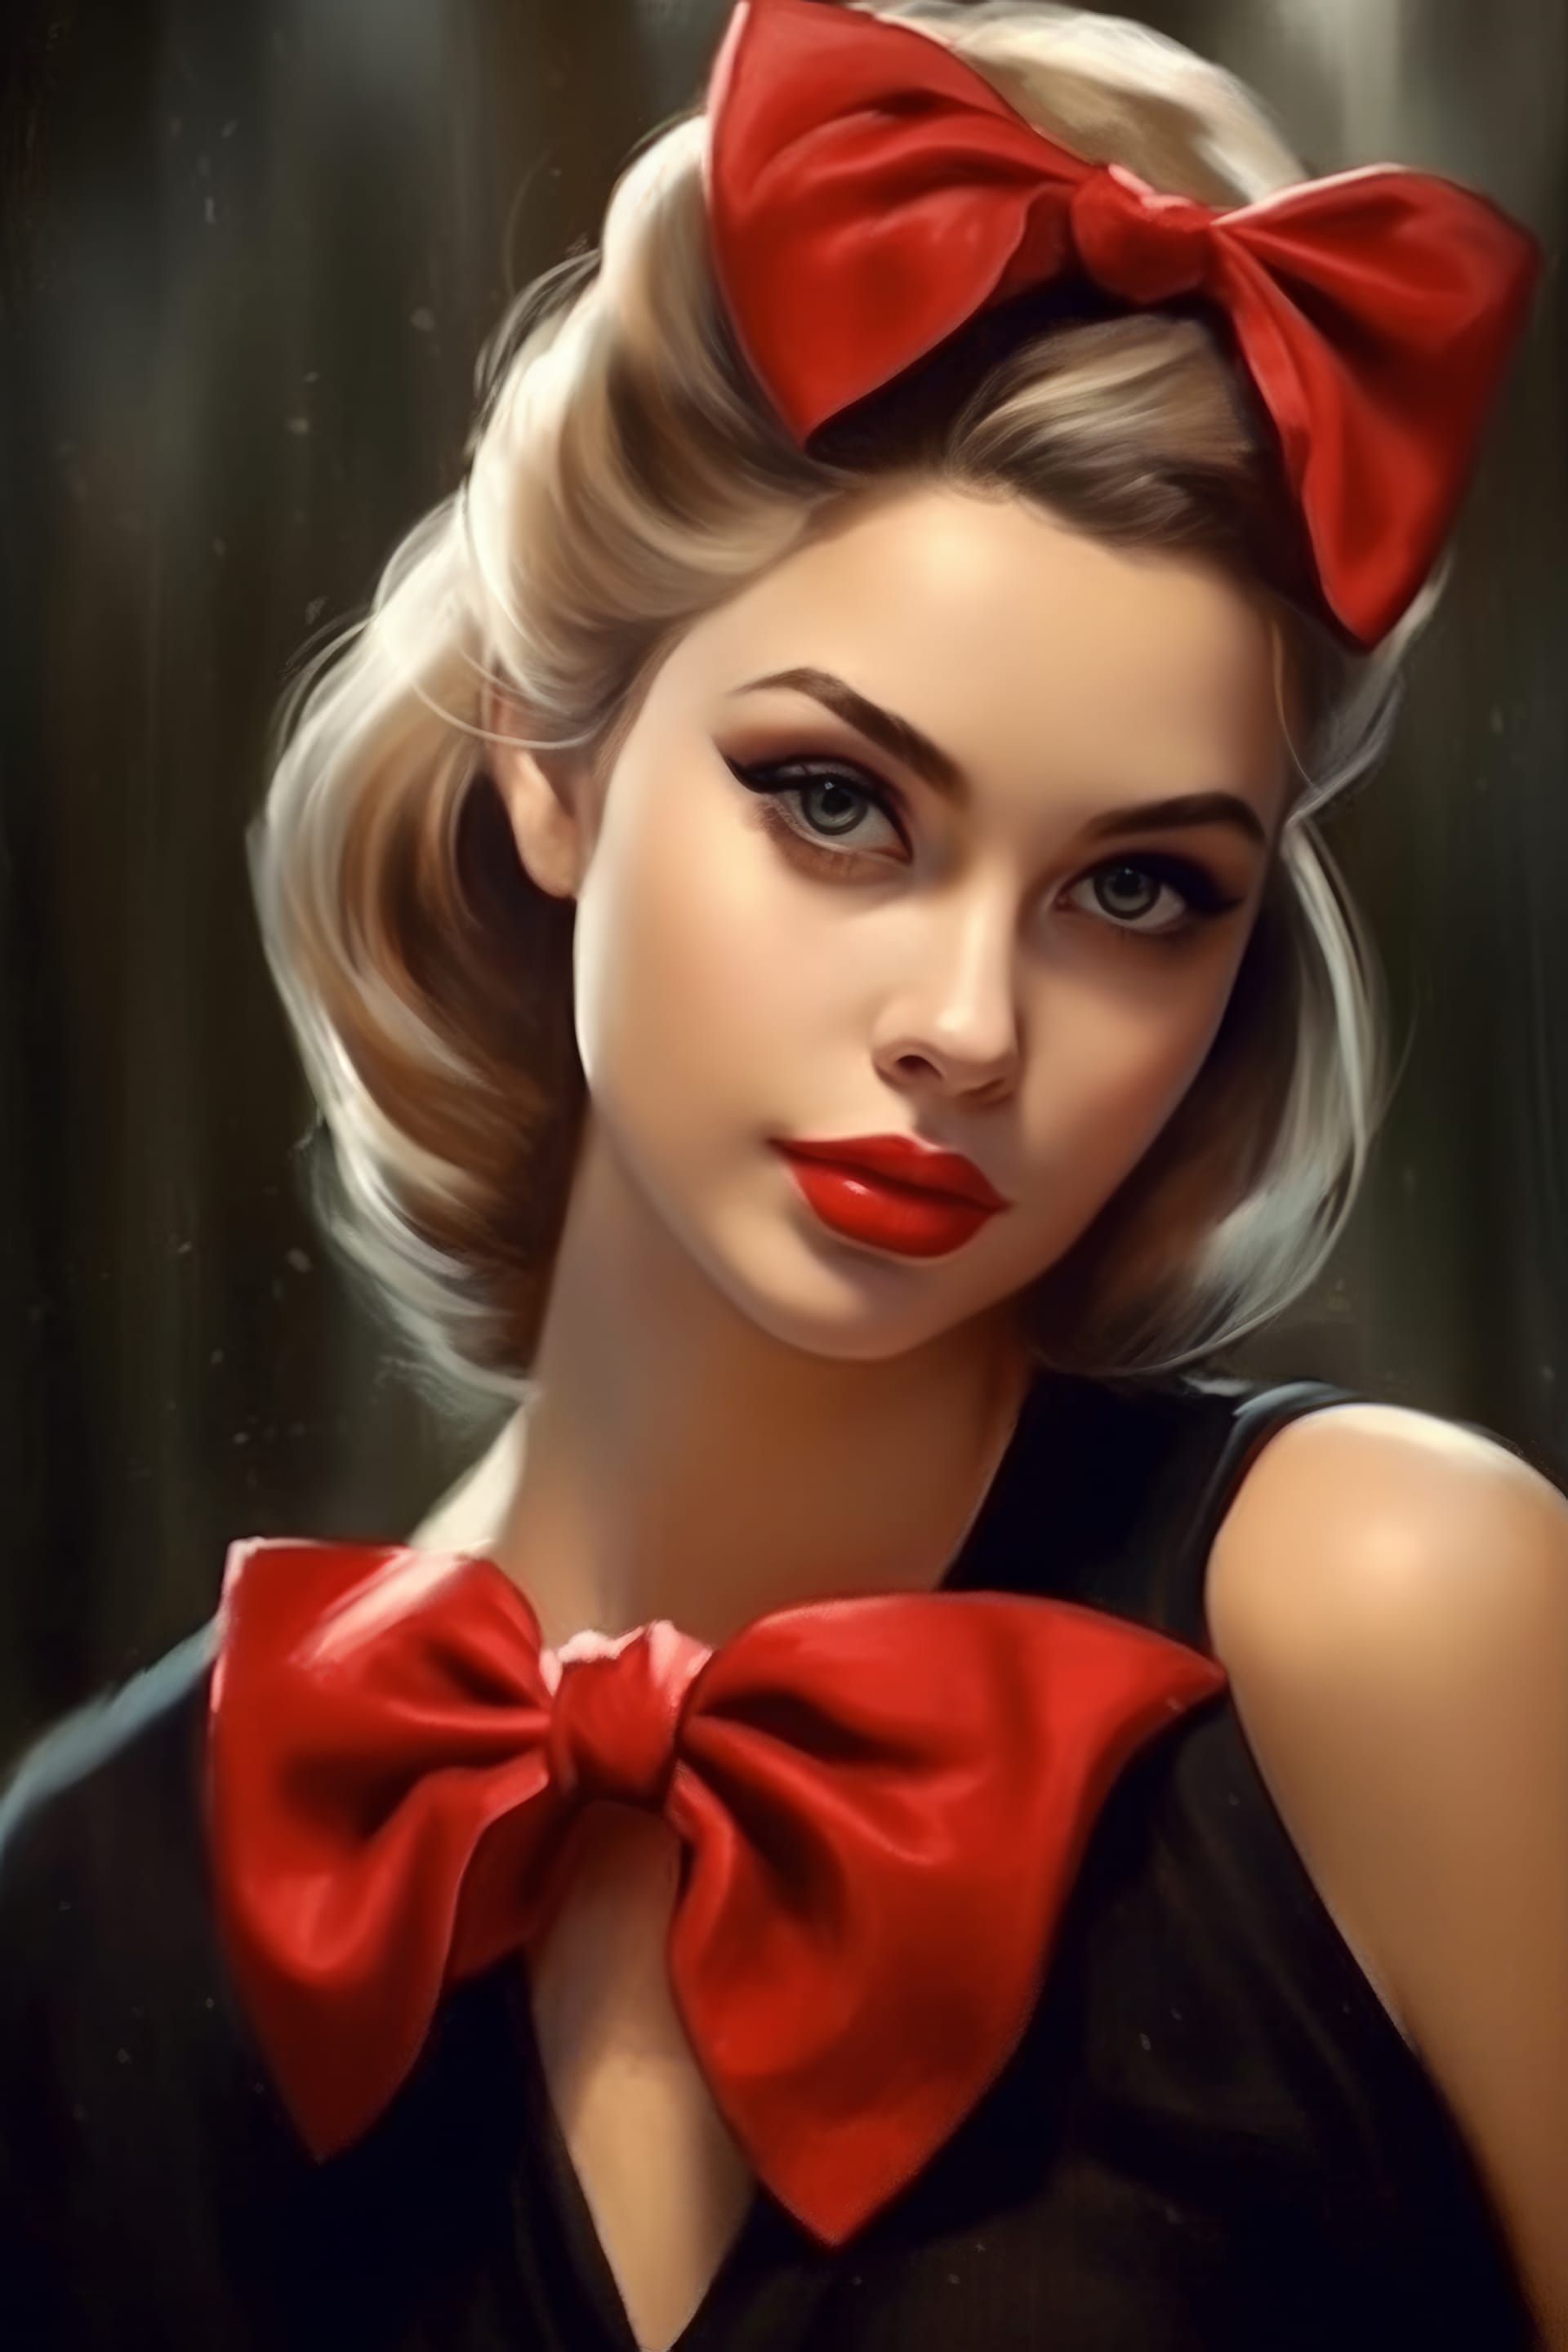 Girl with red bow is posing photo